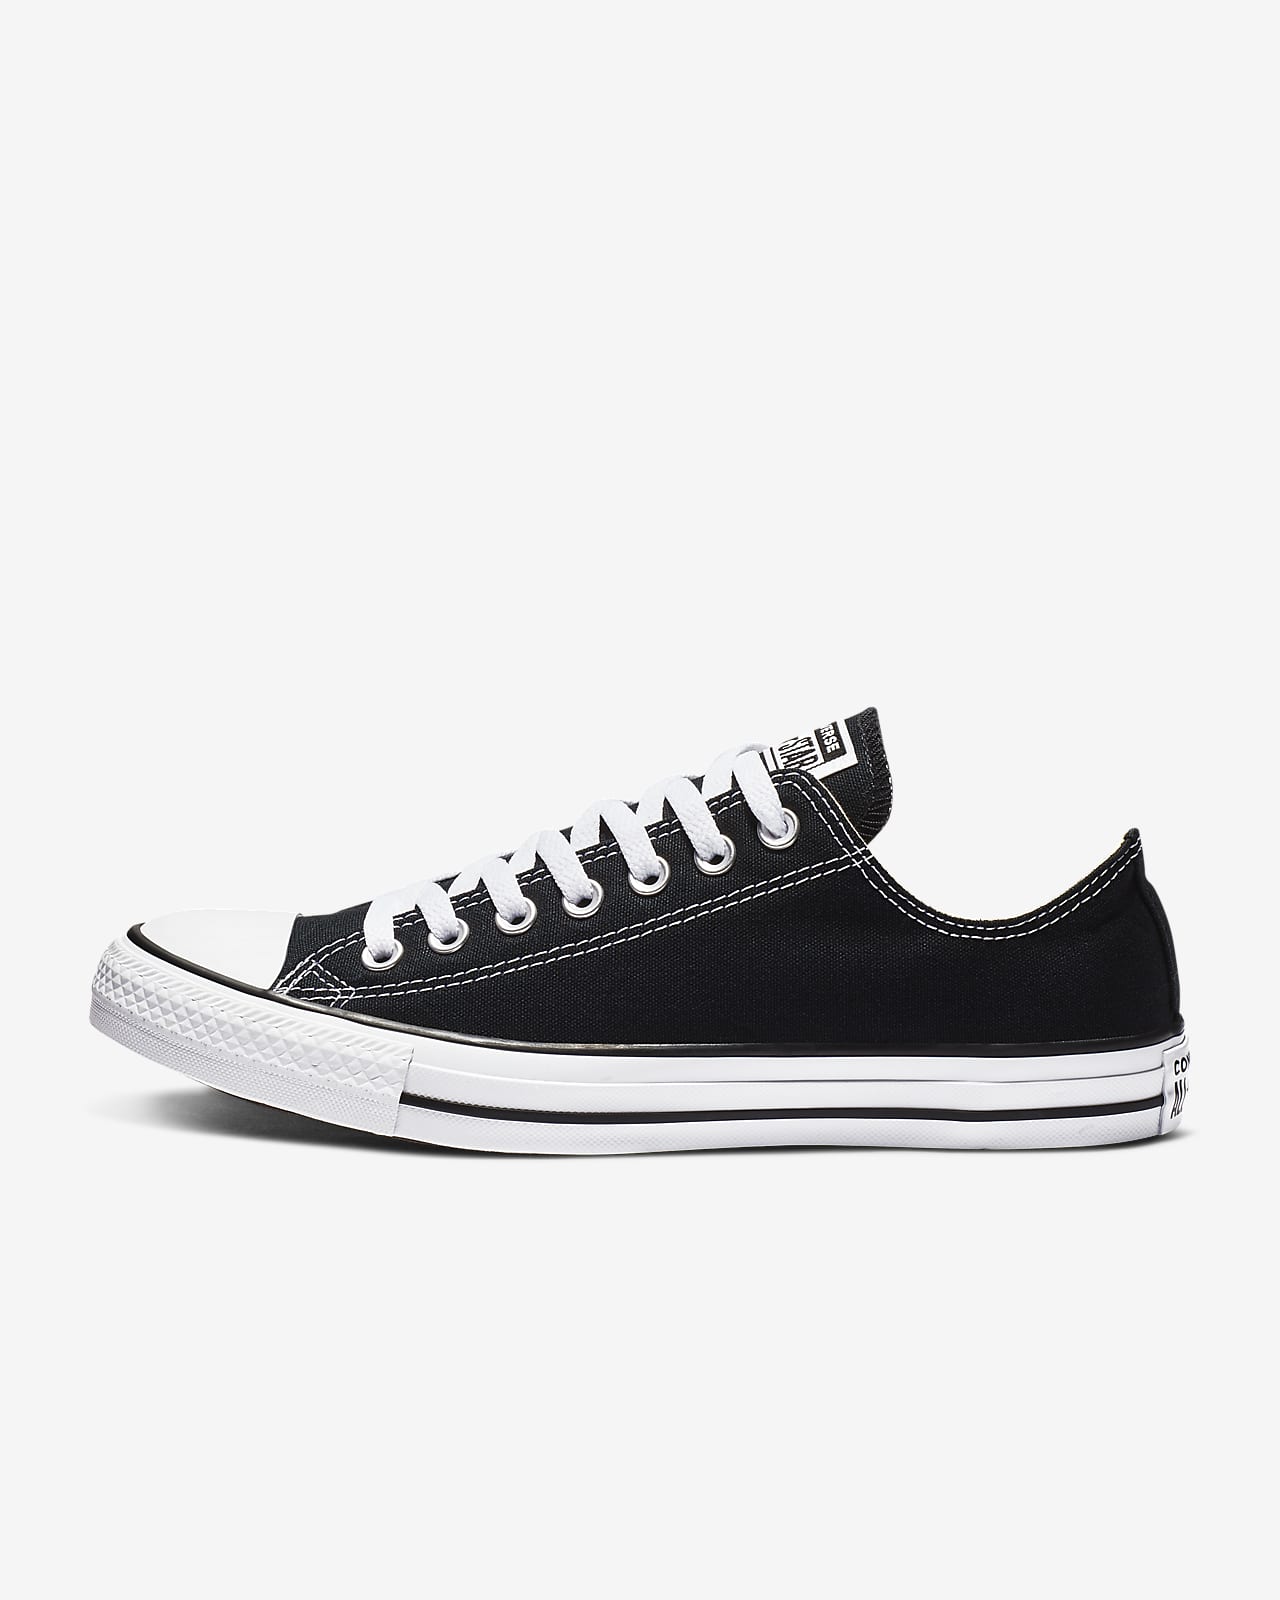 Converse Chuck Taylor All Star Low Top Shoes خلفيات هواوي